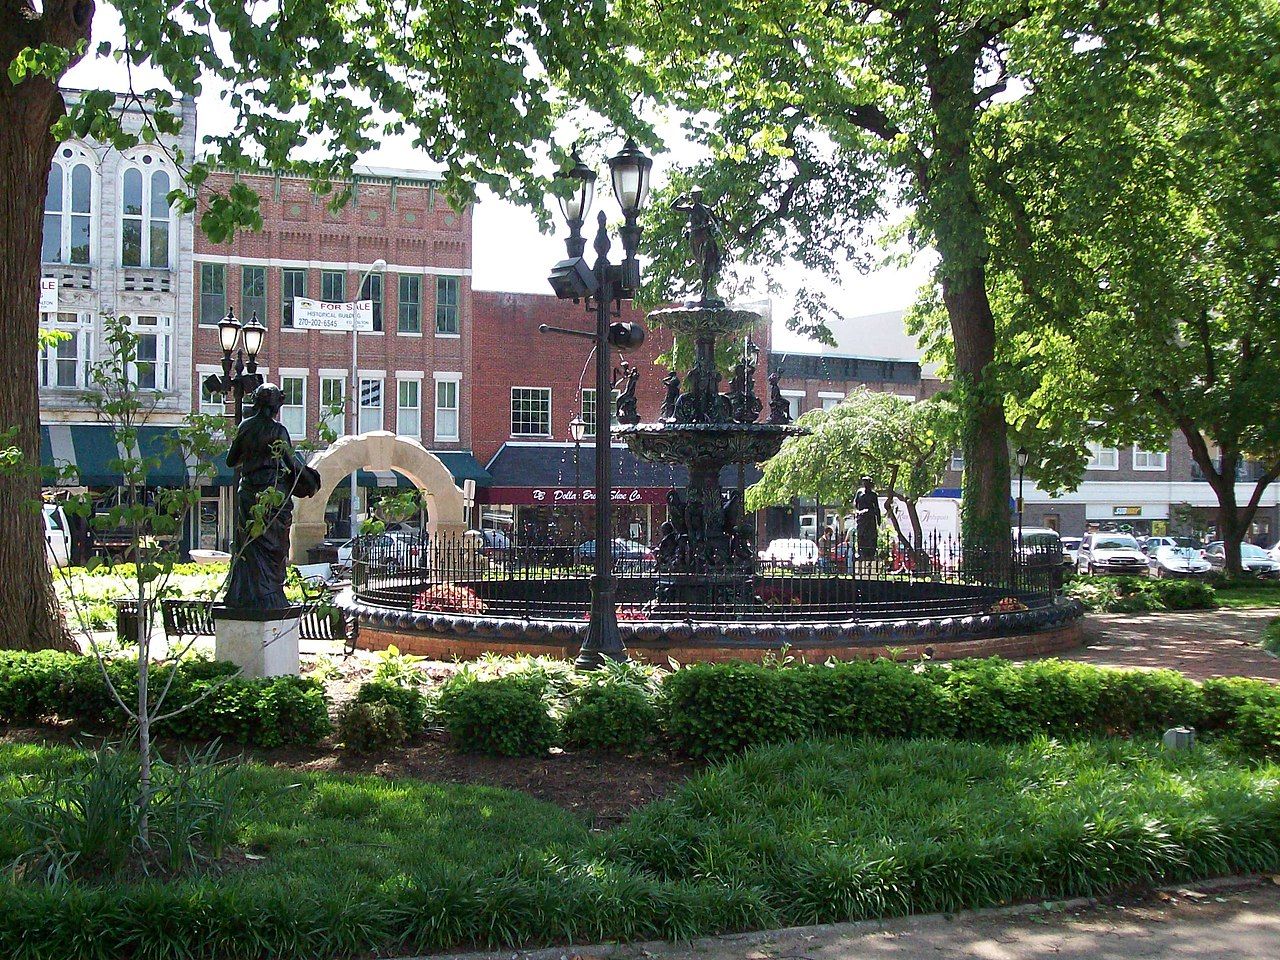 View of a fountain amid greenery in a park in Bowling Green, Kentucky